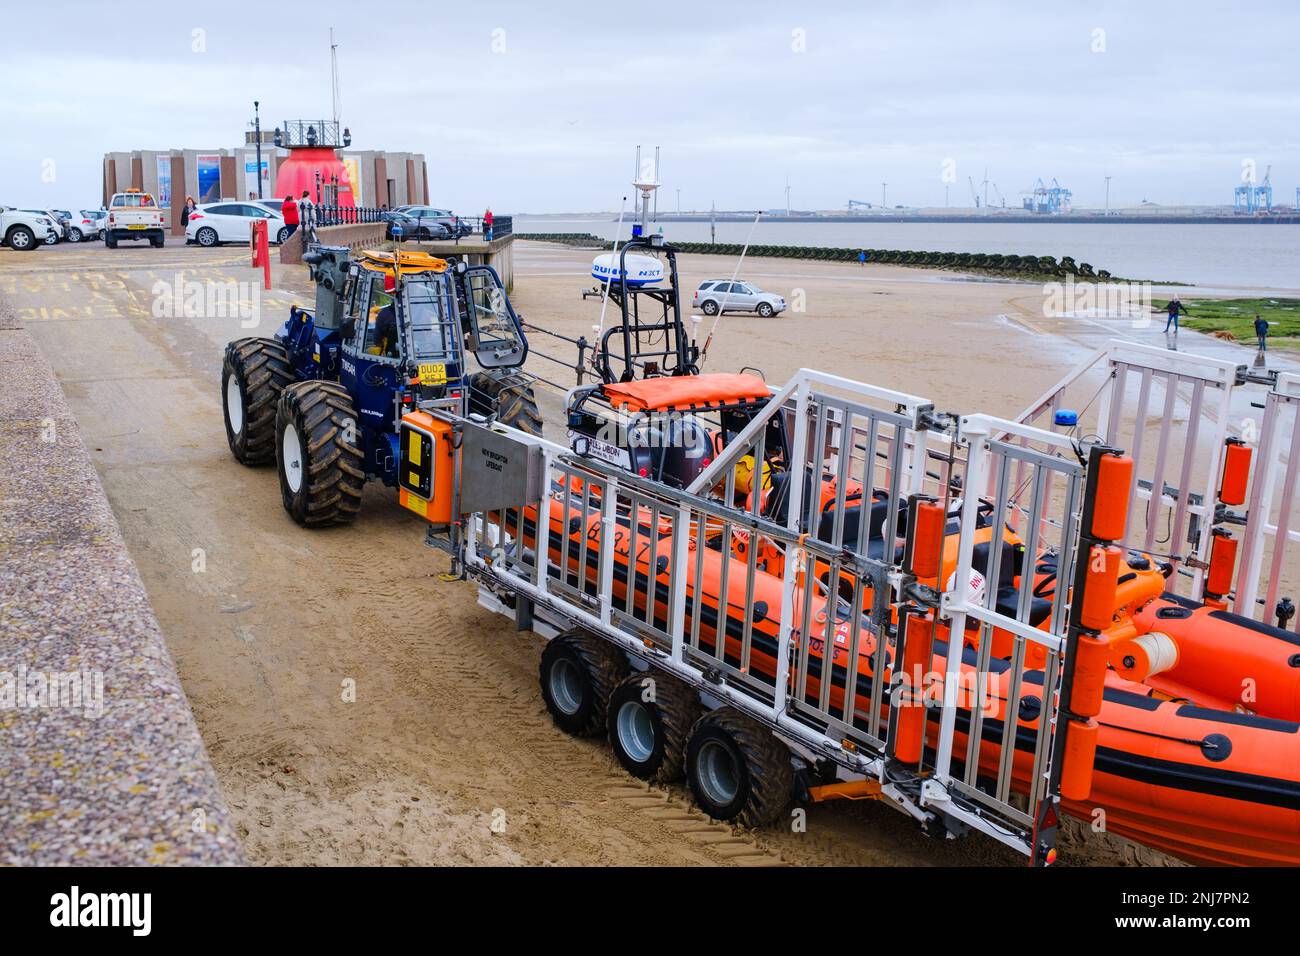 New Brighton life boat crew recovering the boat back up the beach with tractor towing the rib on a trailer after completing a rescue out to sea Stock Photo